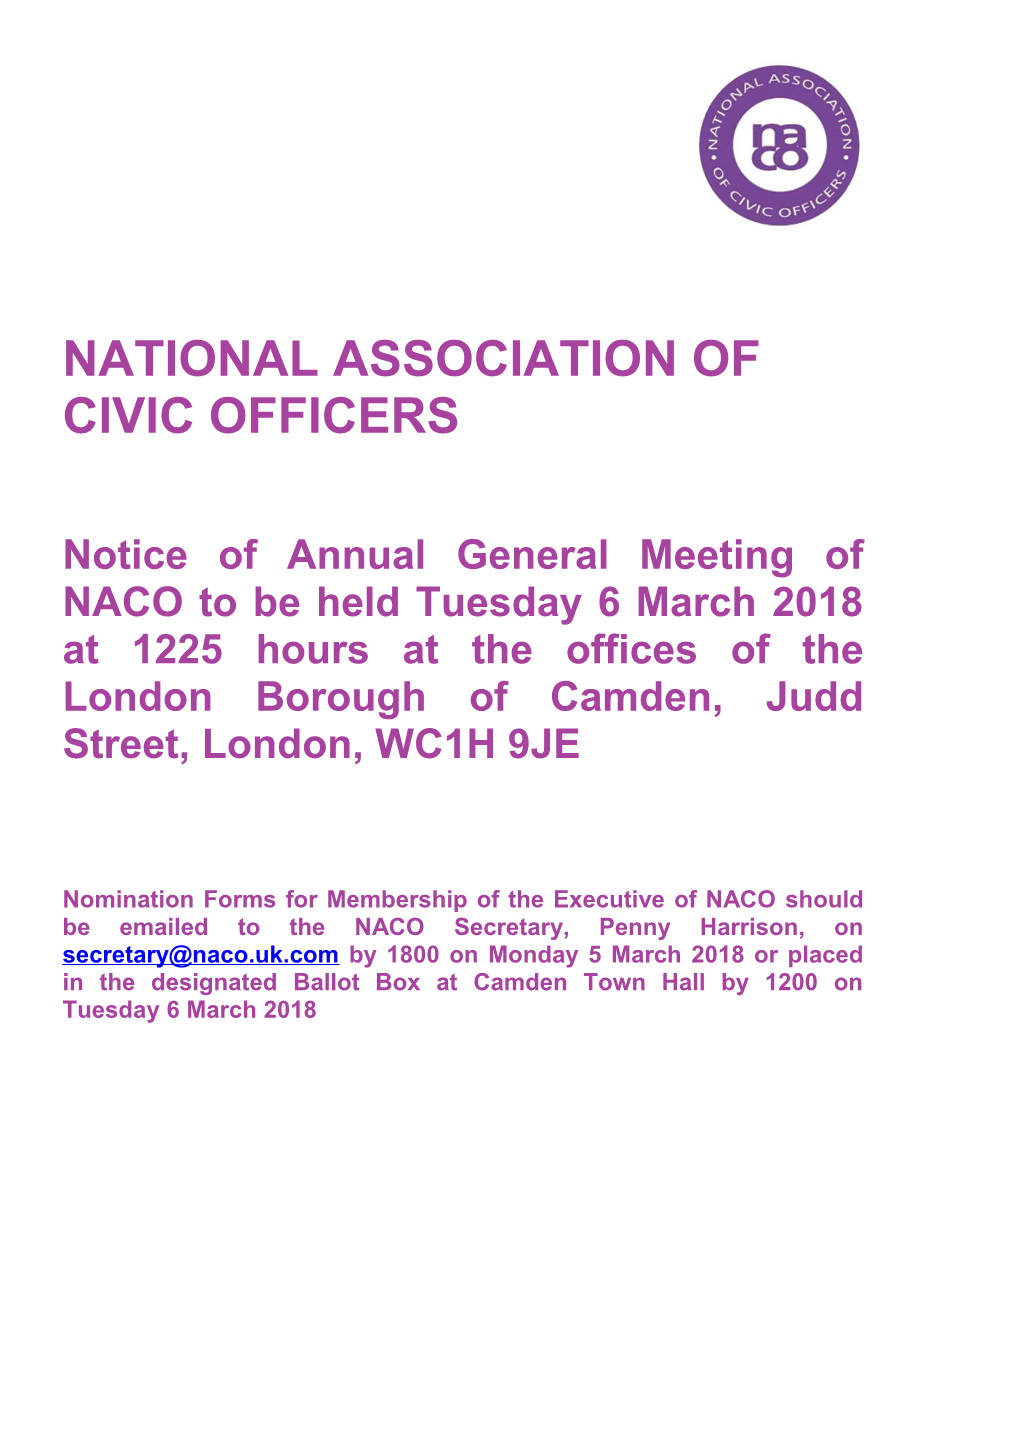 National Association of Civic Officers